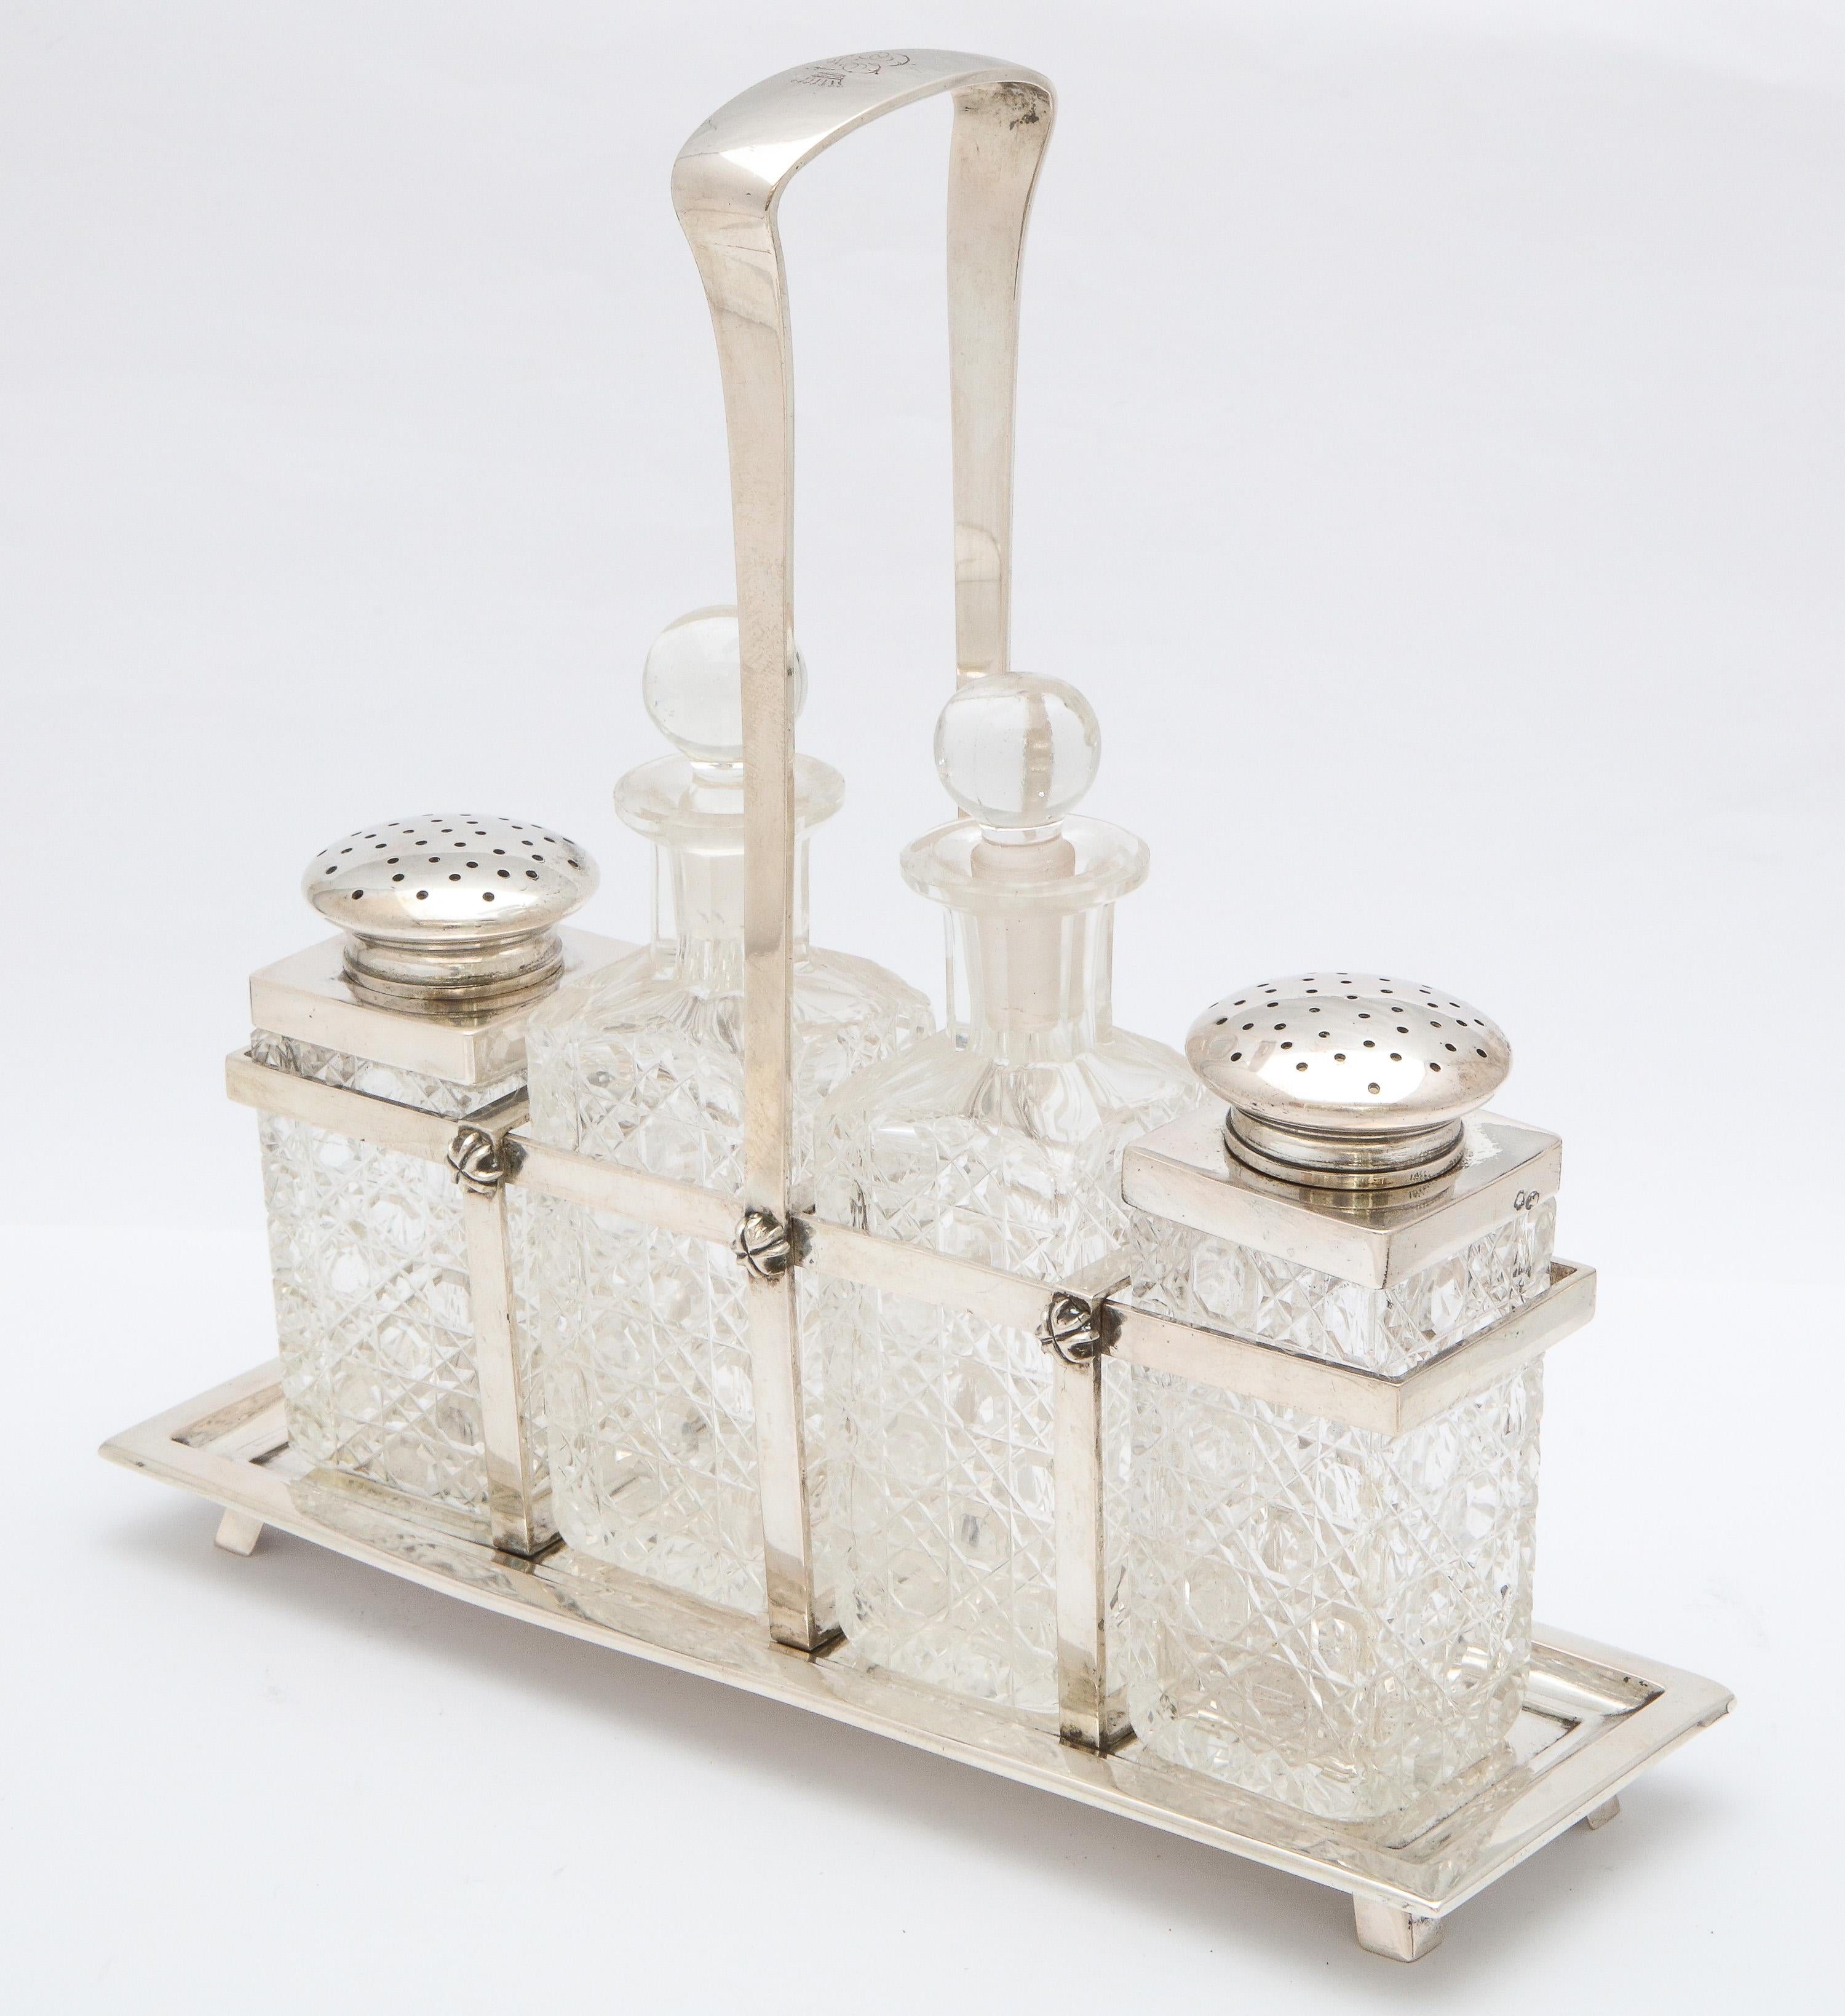 Early 20th Century Art Deco Continental '.800' Silver-Mounted Hobnail Cut-Glass Cruet Set on Stand